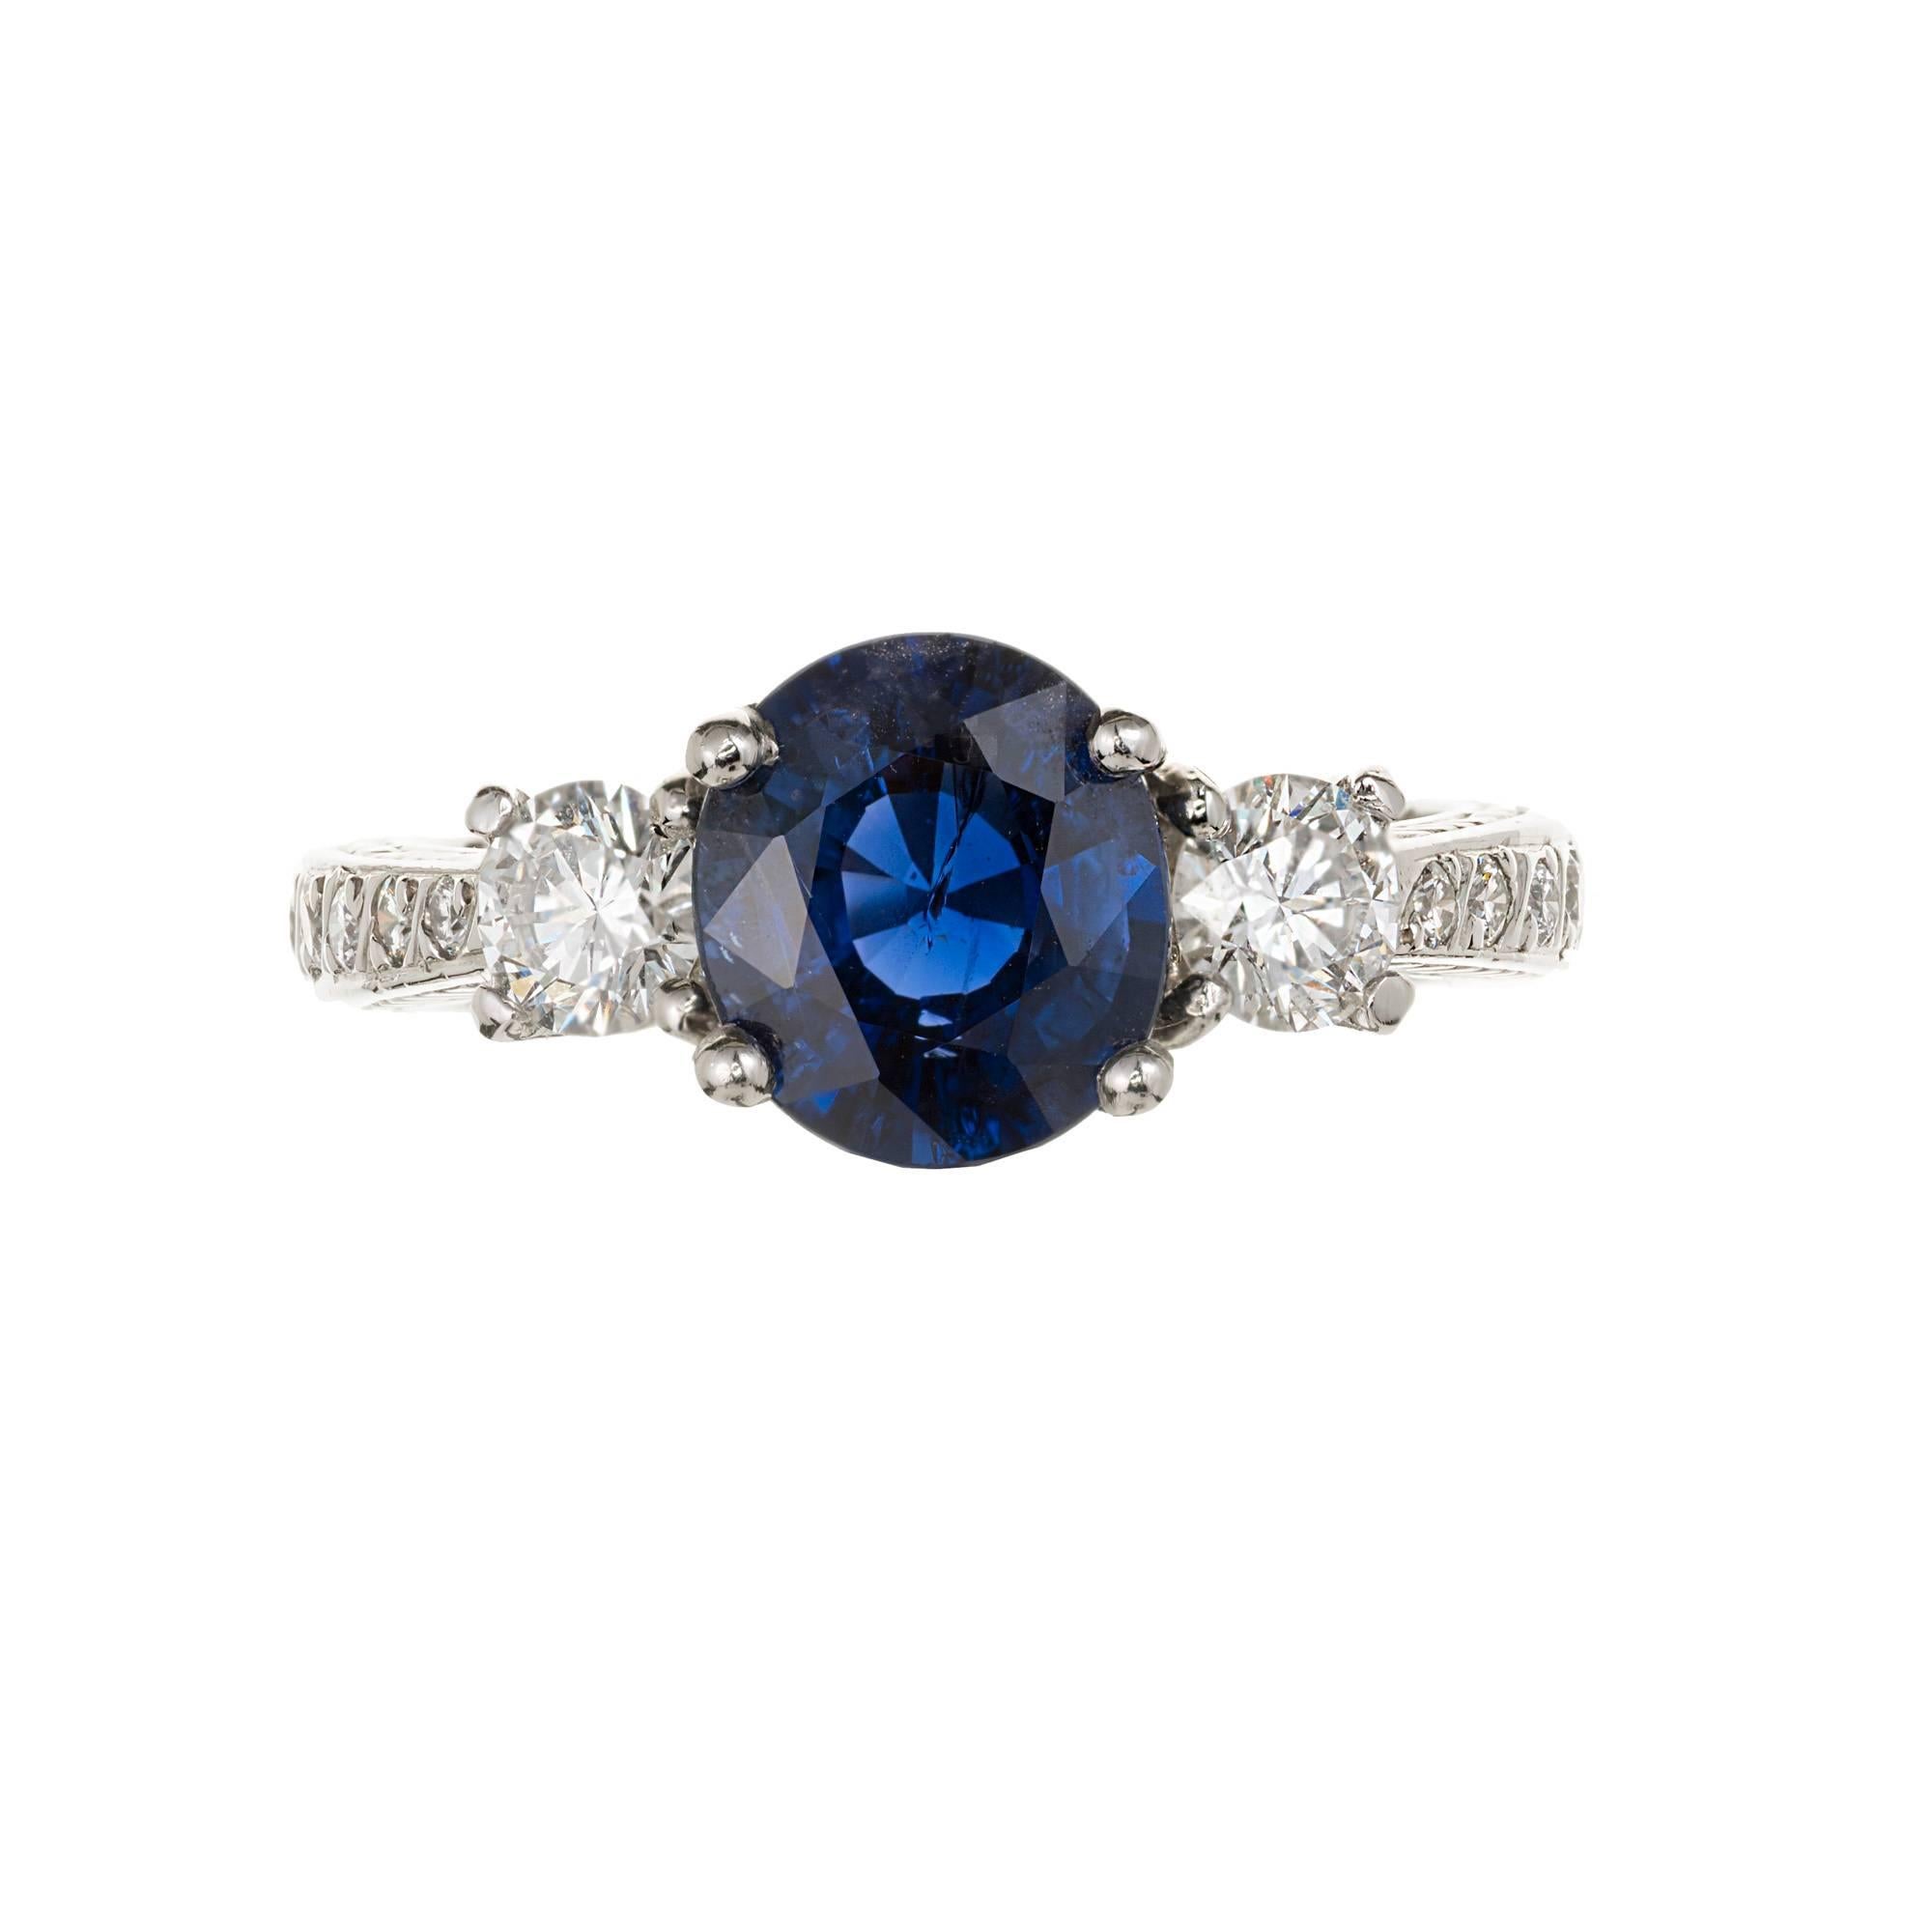 Peter Suchy three-stone sapphire and diamond handmade engagement ring in a Platinum setting with accent diamonds. Royal blue natural no heat cushion Sapphire. GIA certified, 

1 oval cushion shape natural Sapphire no heat and no enhancements, 8.72 x